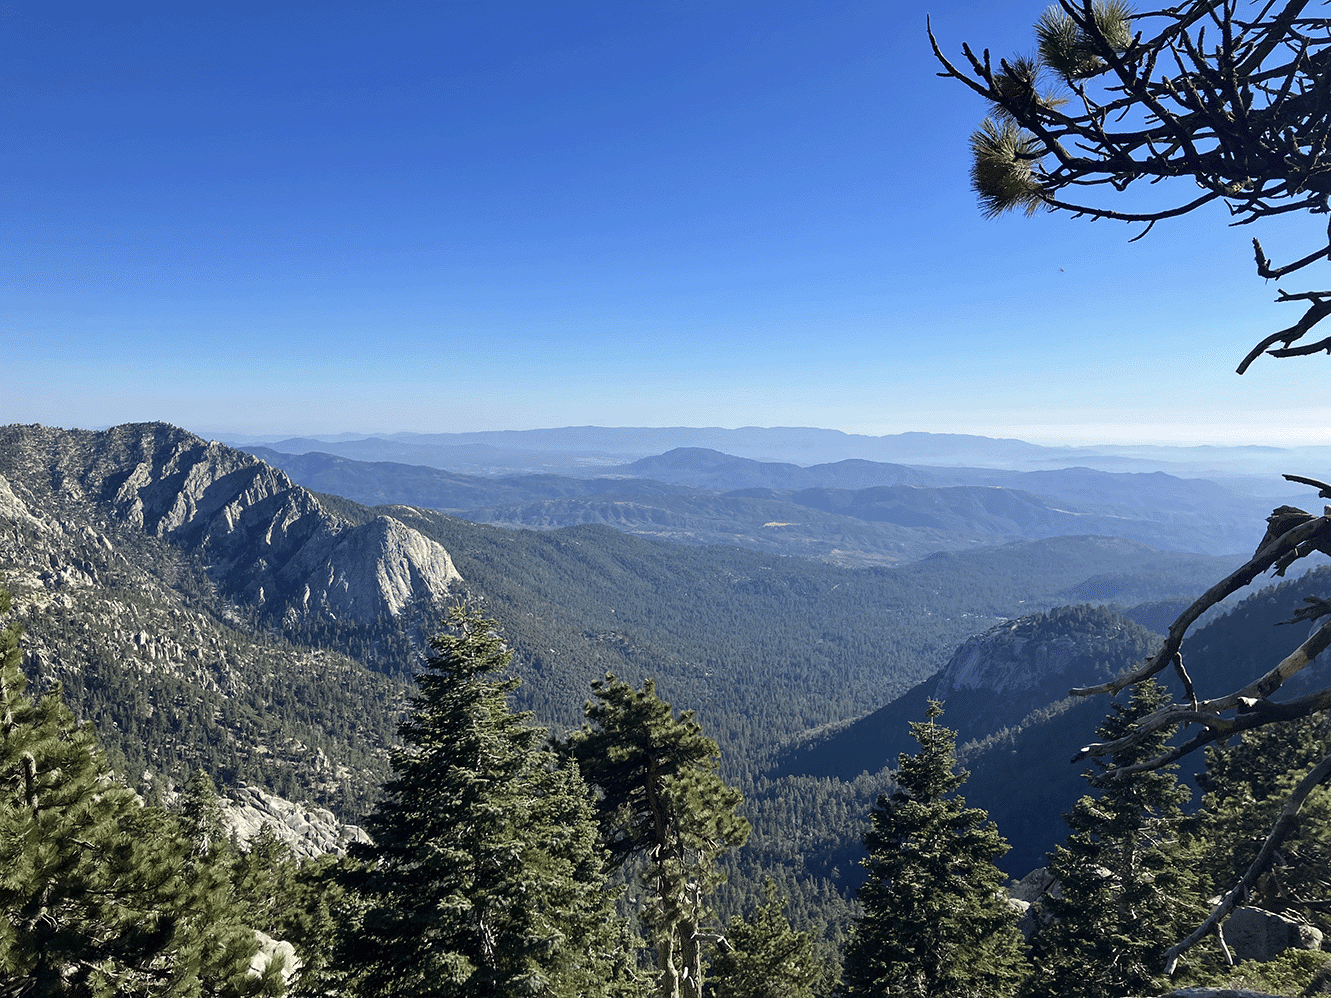 Looking over Tahquitz Peak on the trail up to Mt. San Jacinto